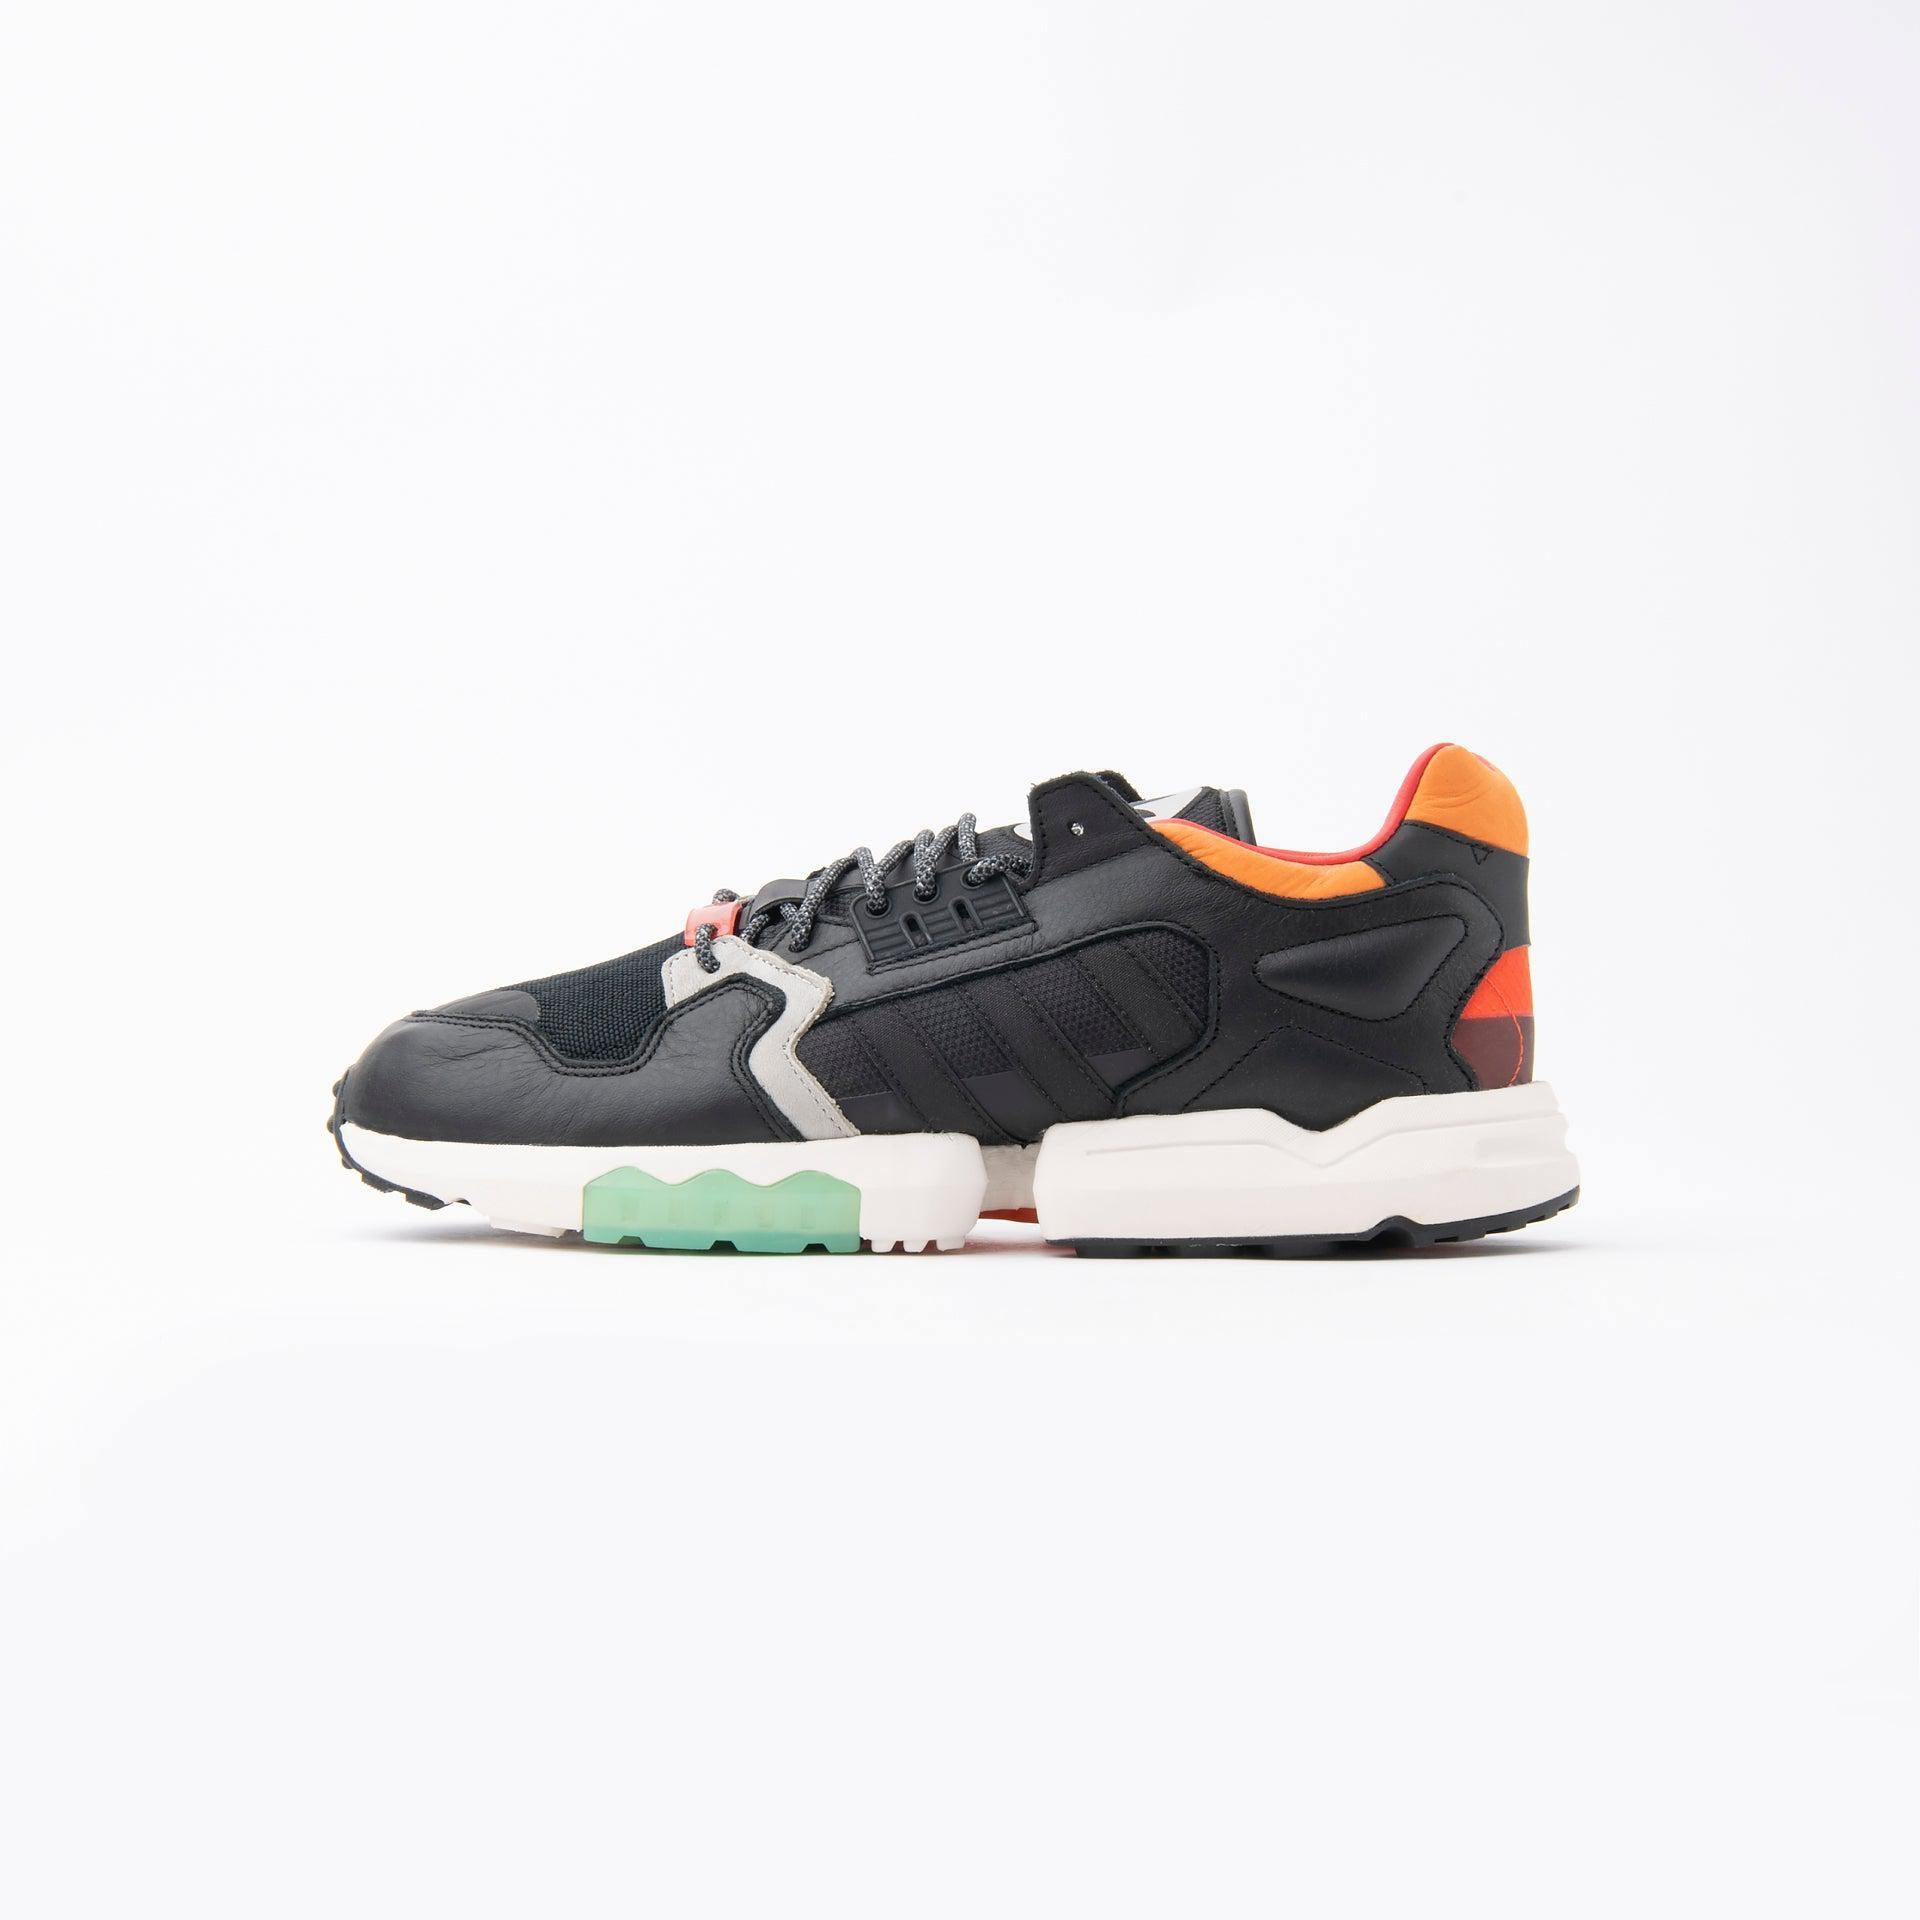 Black And Orange ZX Torsion Sneakers From Adidas - WECRE8